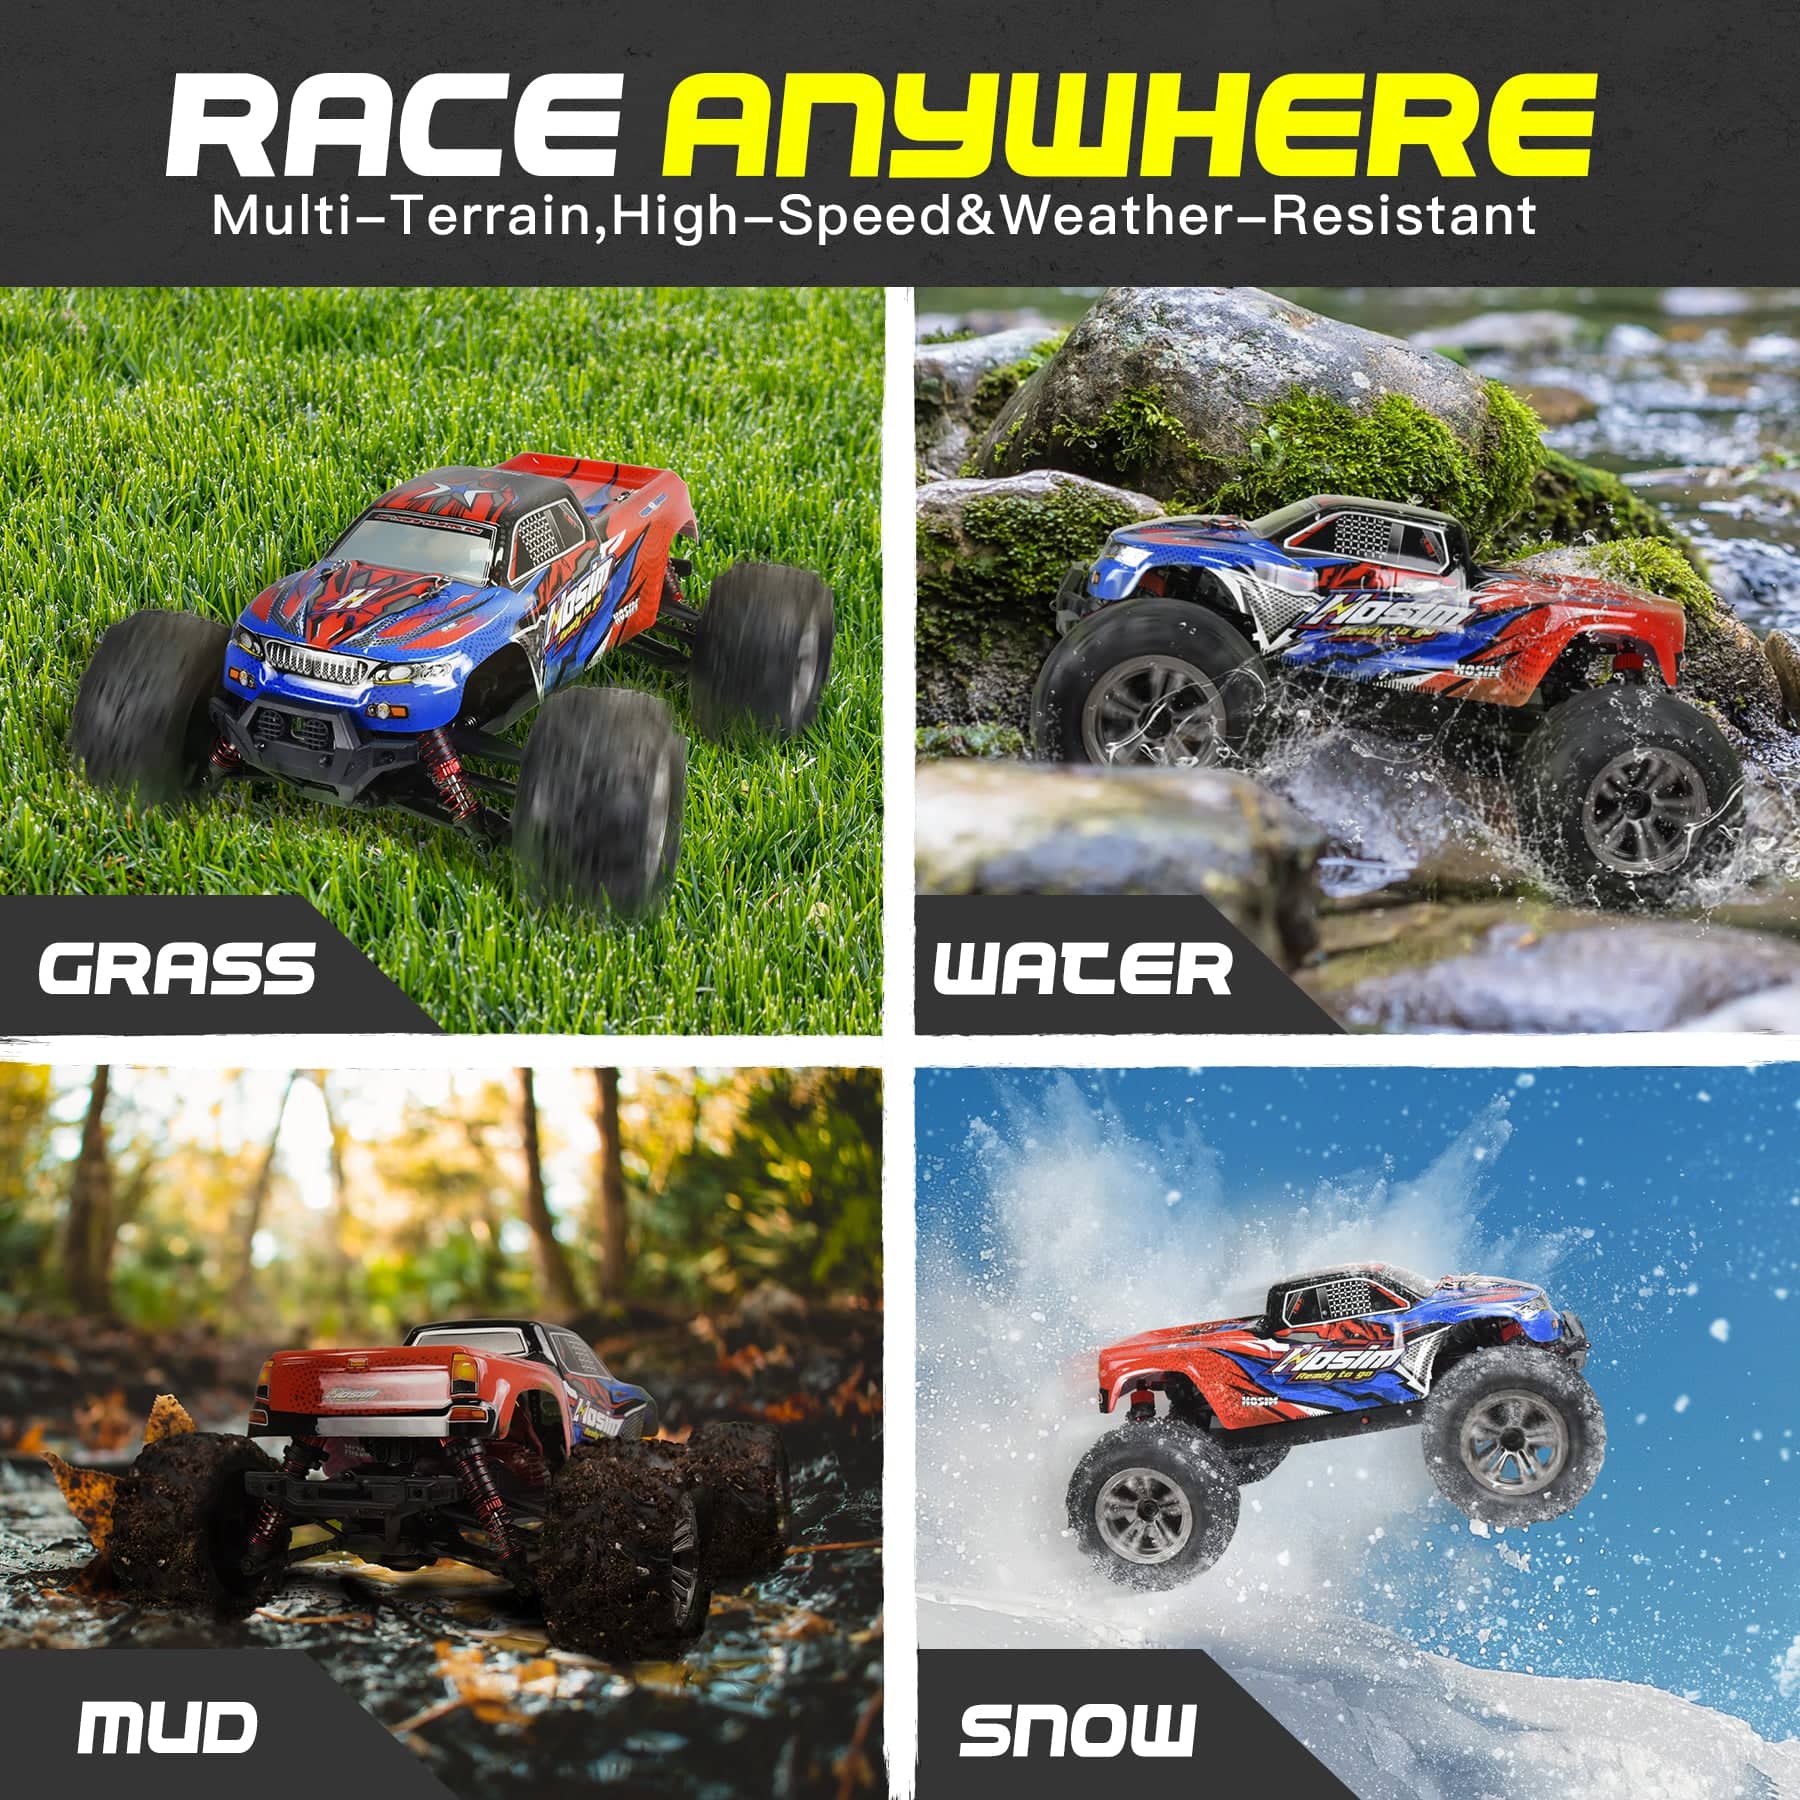 Hosim 1:16 RC Cars  RC Monster Truck 36+KPH All Terrain 4WD Off Road Vehiclefor Boys Kids and Adults Gift